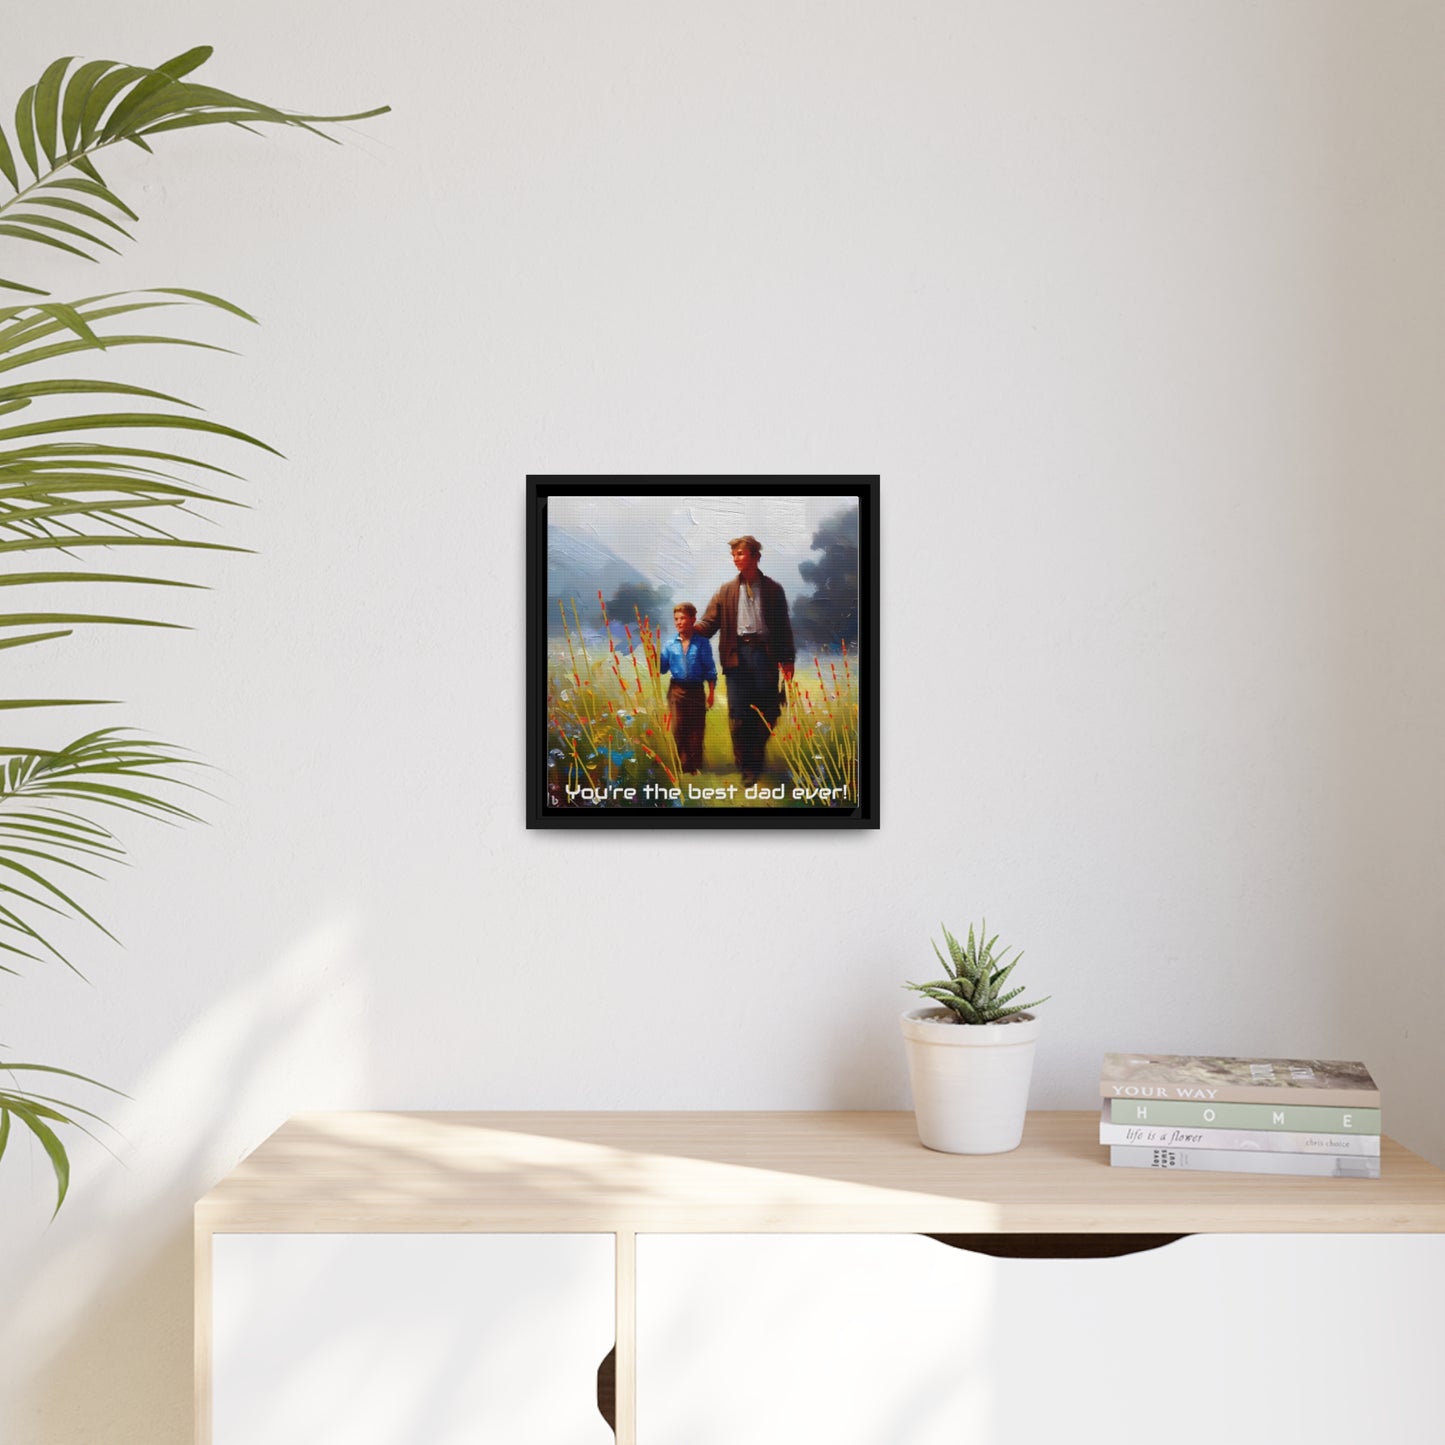 Awesome Matte Wall Art Canvas  Black Frame - Fathers Day Gift Item